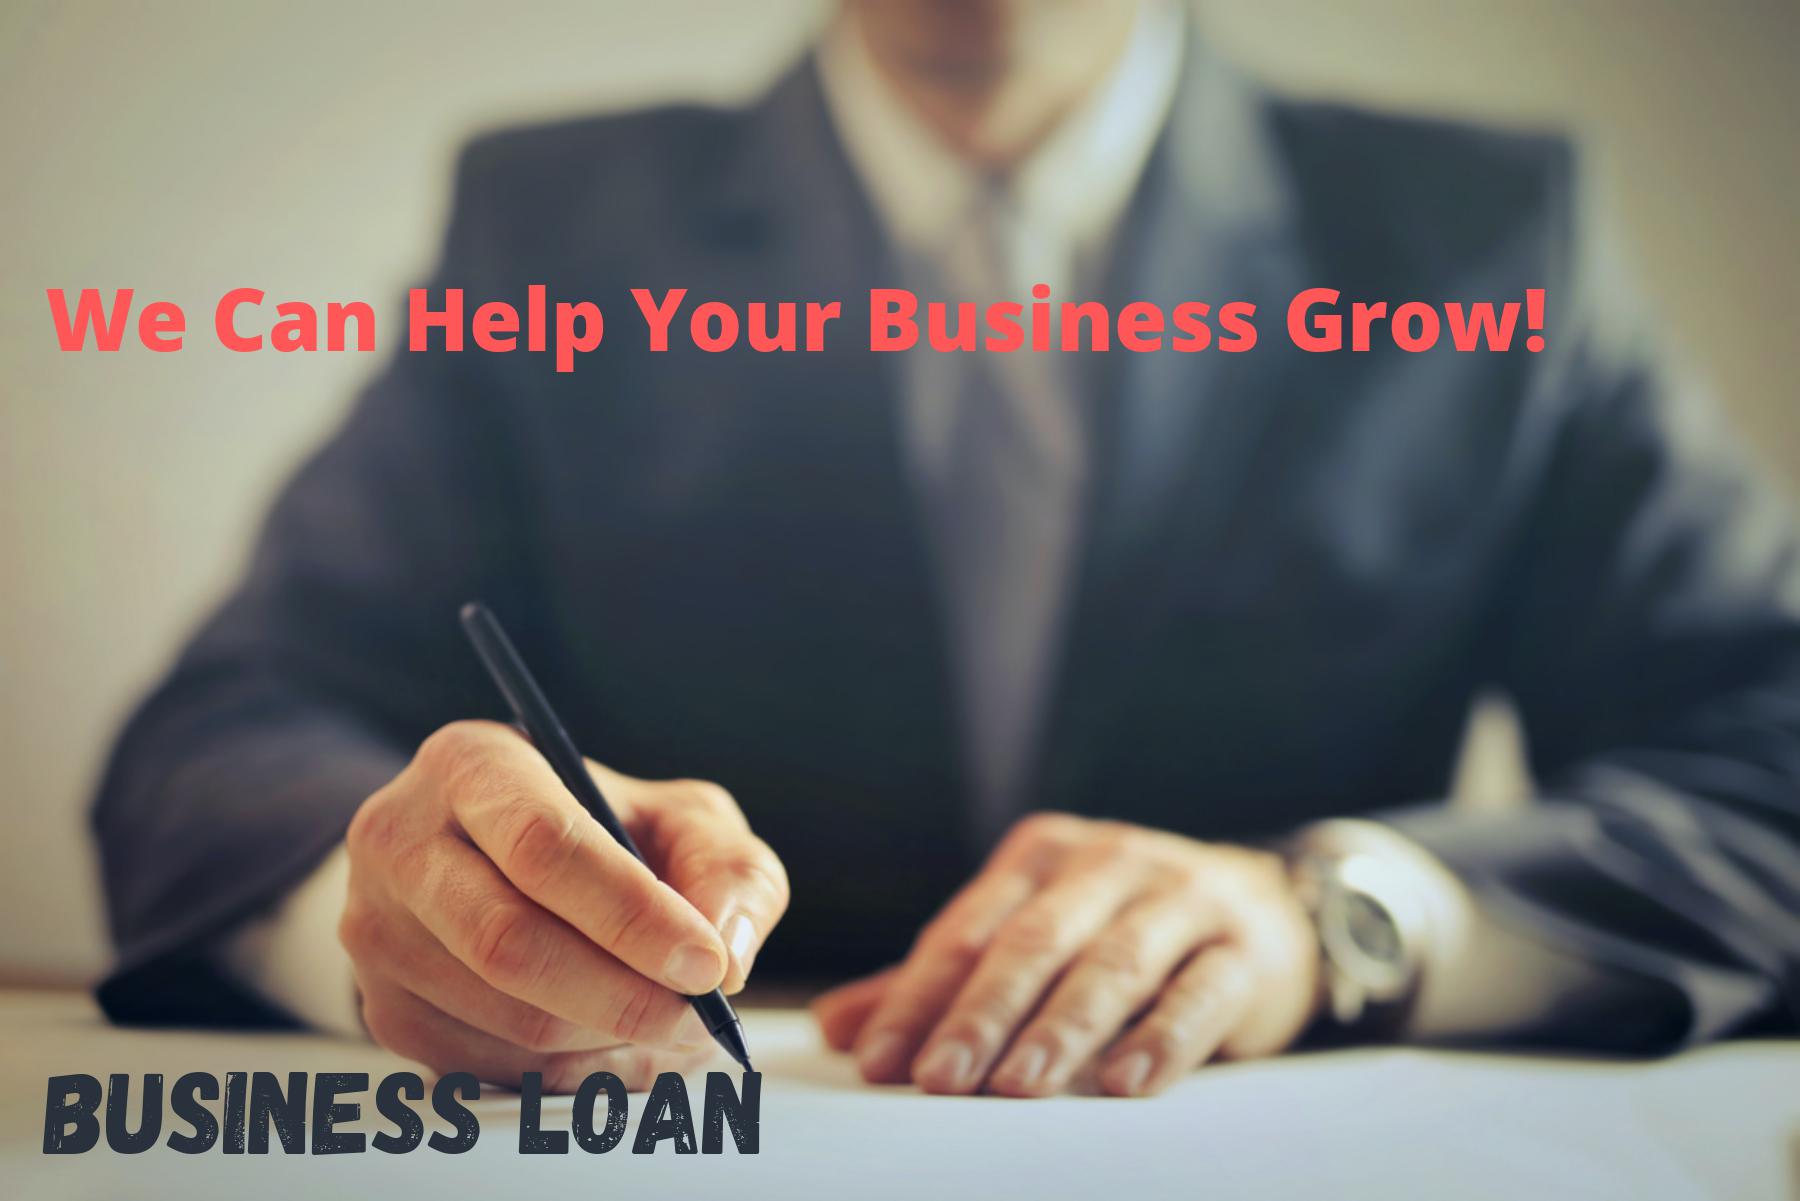 Business loan in bangalore